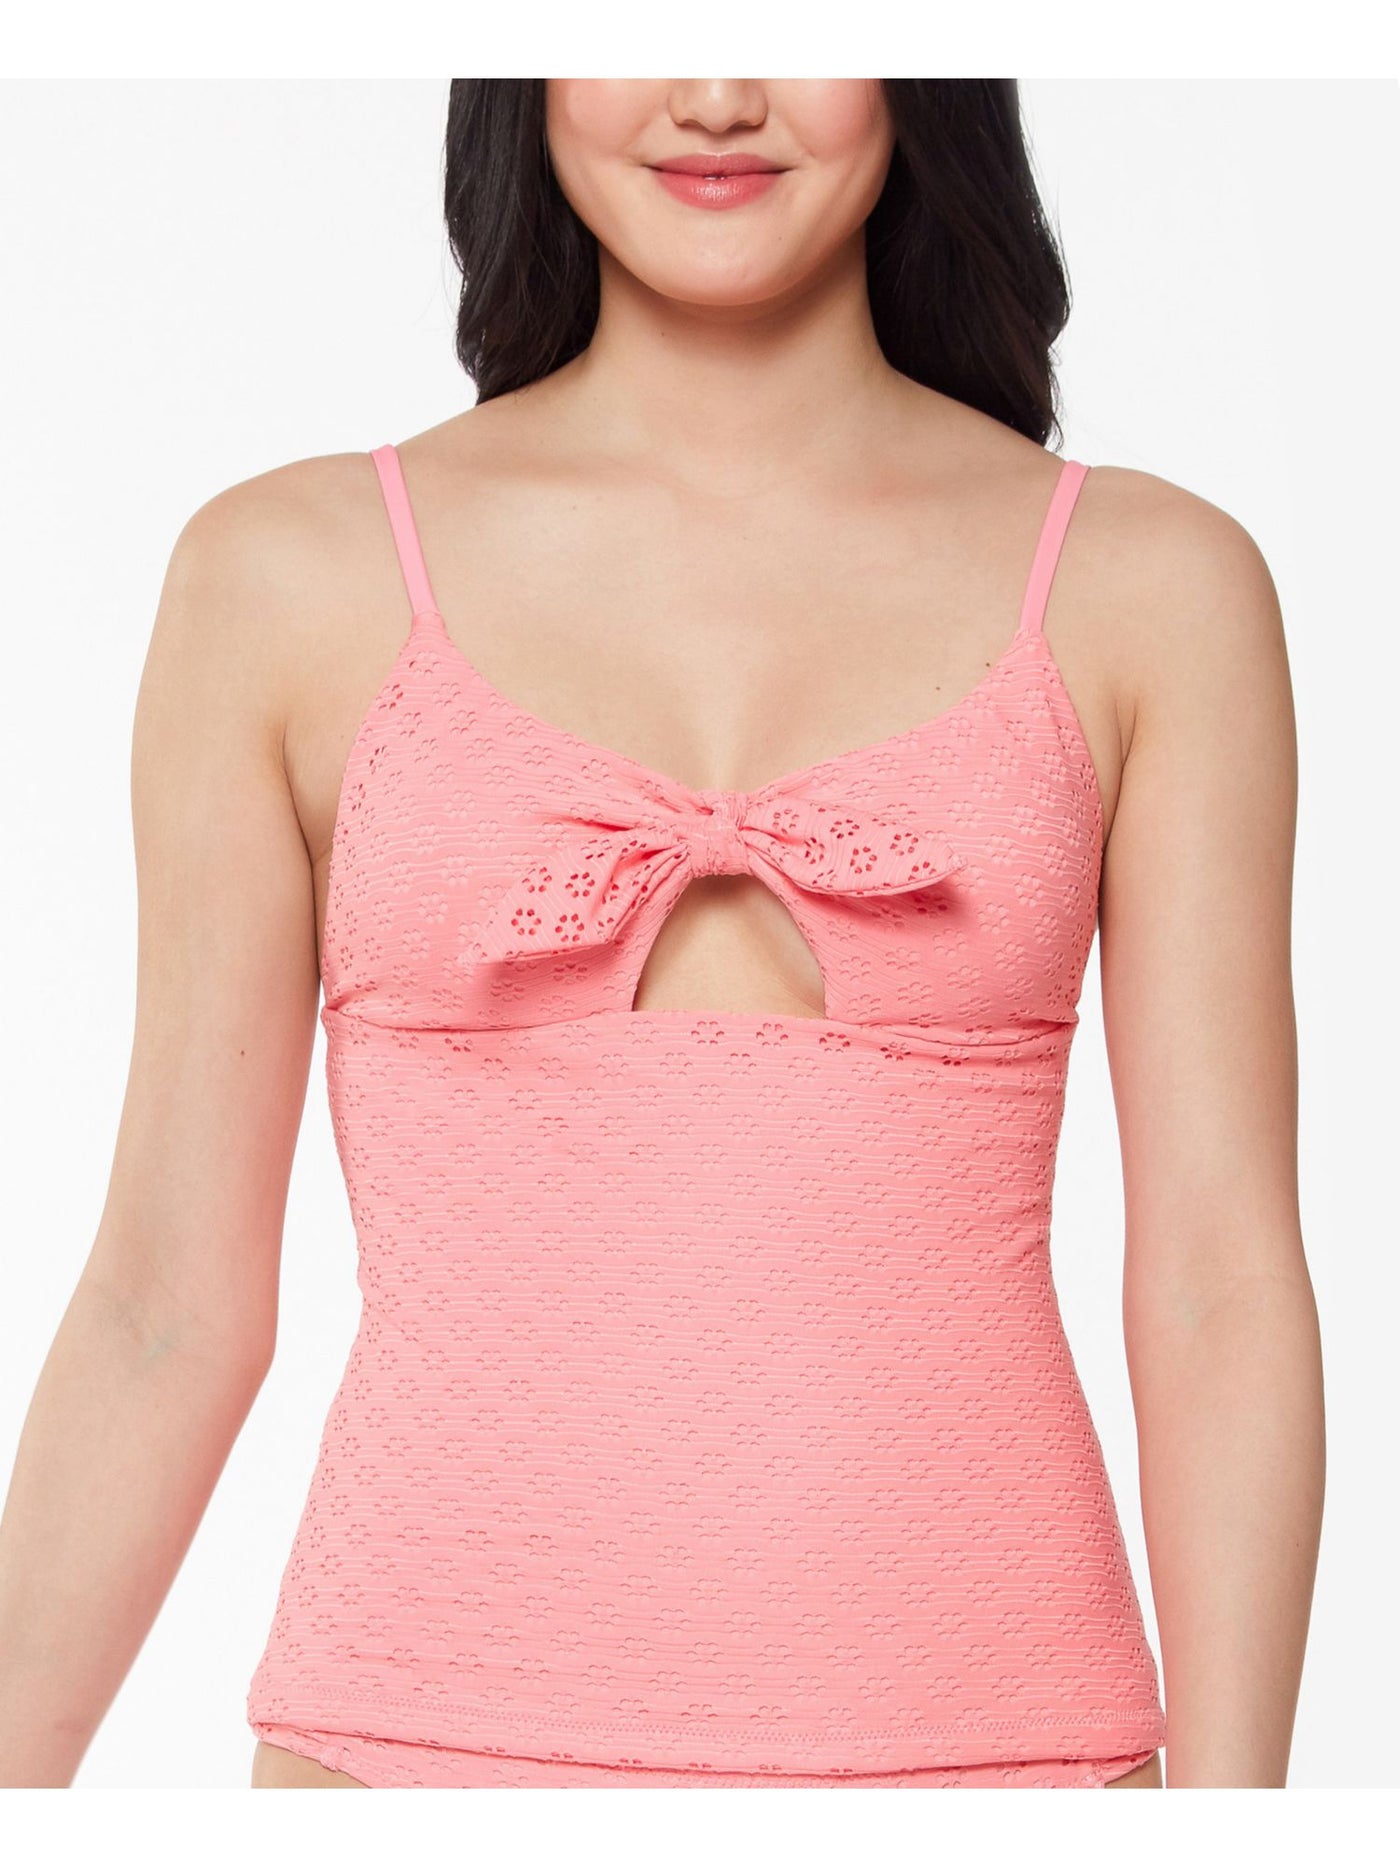 JESSICA SIMPSON Women's Coral Eyelet Tie Front Removable Cups Cutout Adjustable Sweet Tooth Tankini Swimsuit Top M